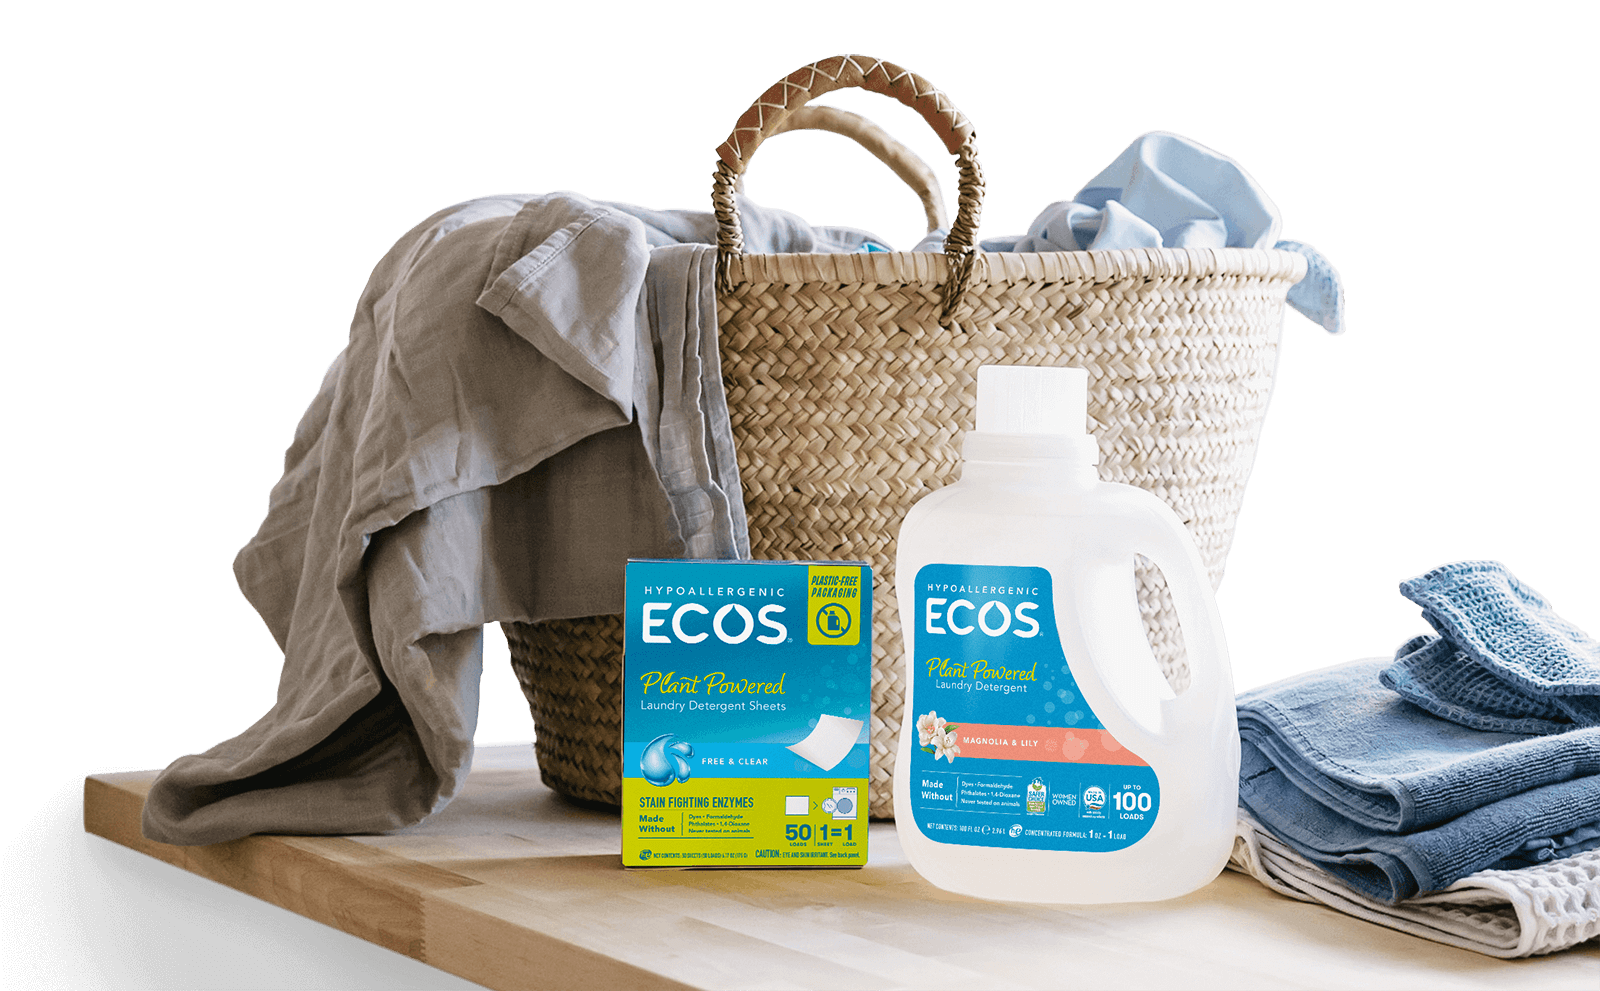 ECOS Products by a laundry basket